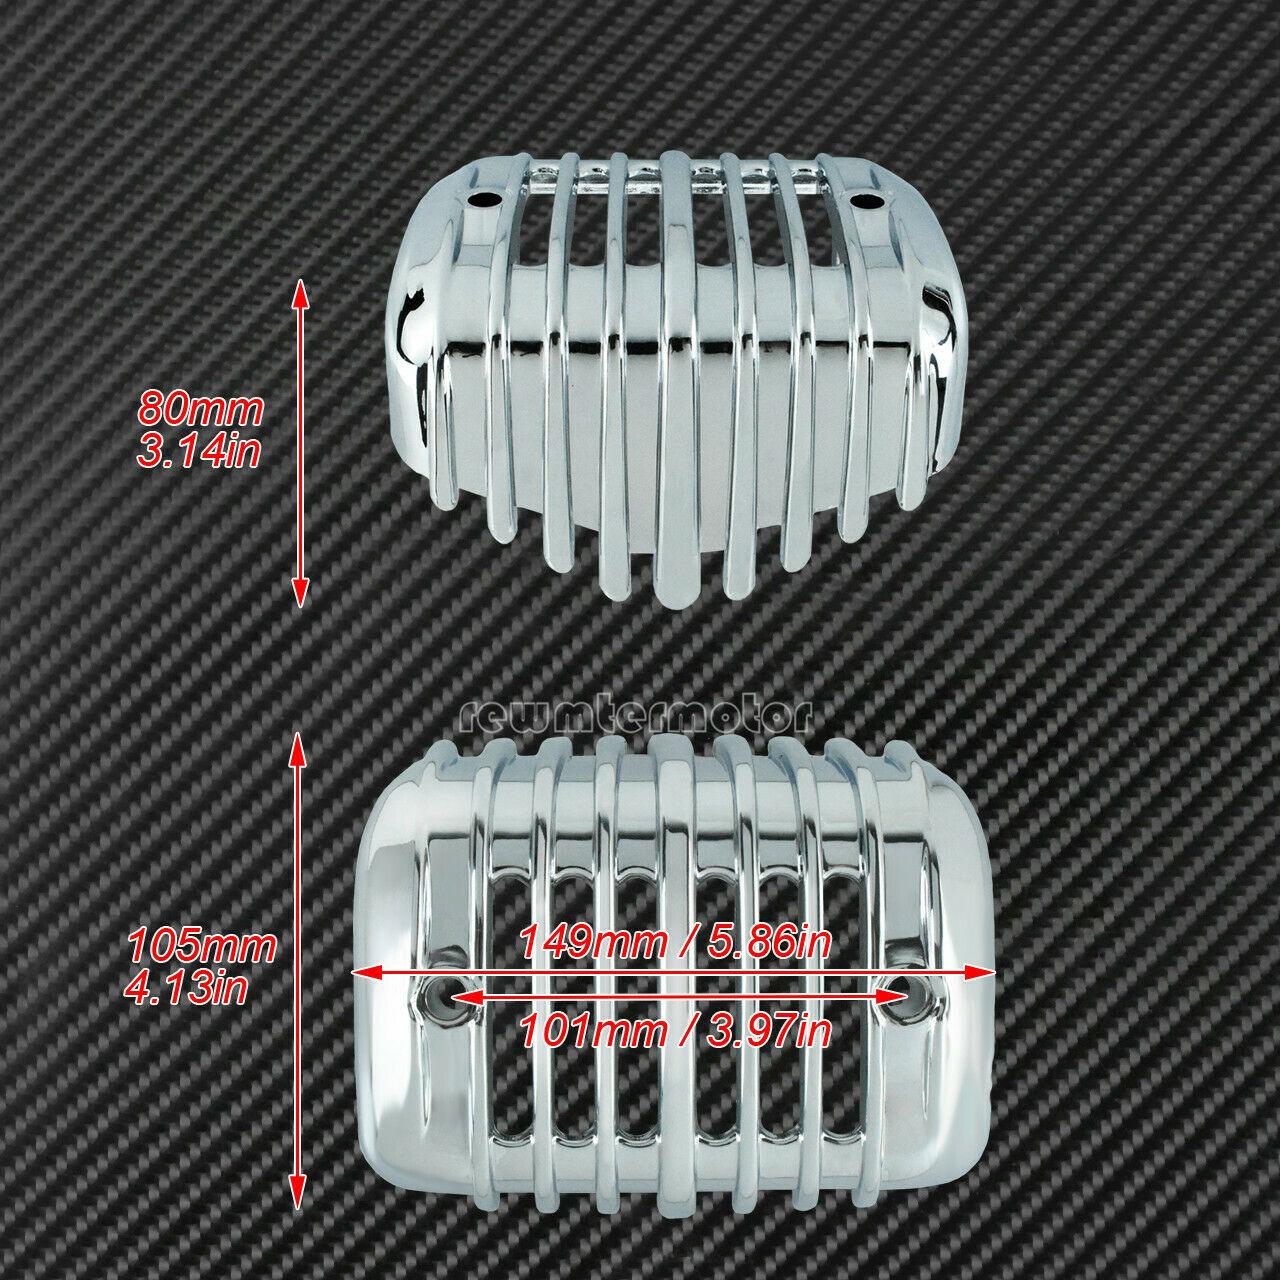 ABS Chrome Voltage Regulator Cover Fairing Fit For Harley Softail FXS FXSB 01-17 - Moto Life Products